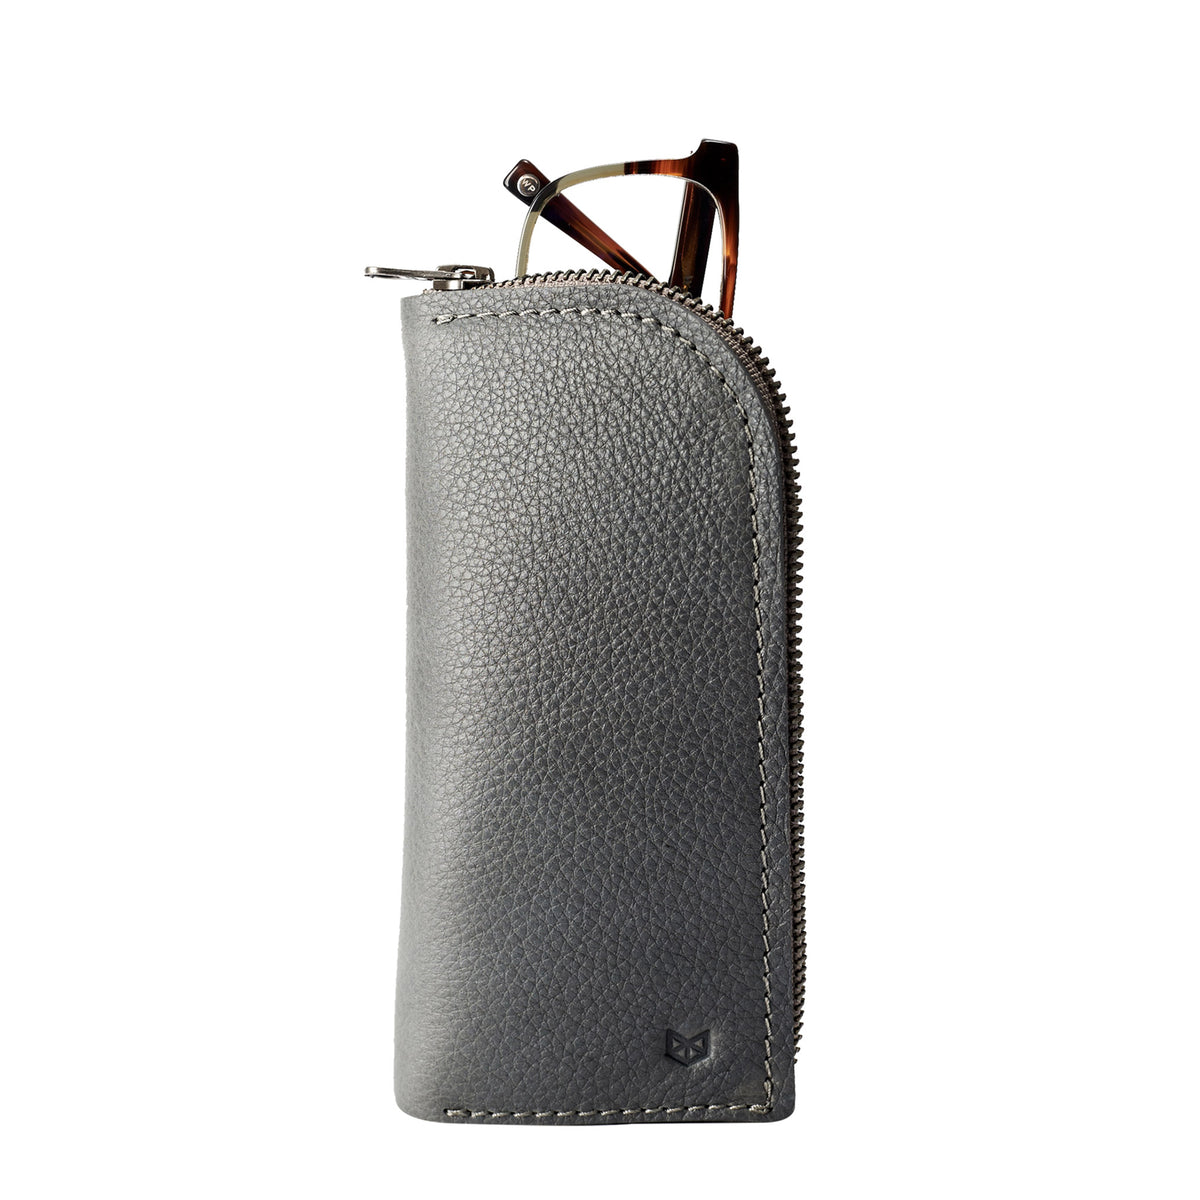 Gifts for men. Grey leather Glasses case, sunglasses case, hand stitched leather sleeve for reading glasses